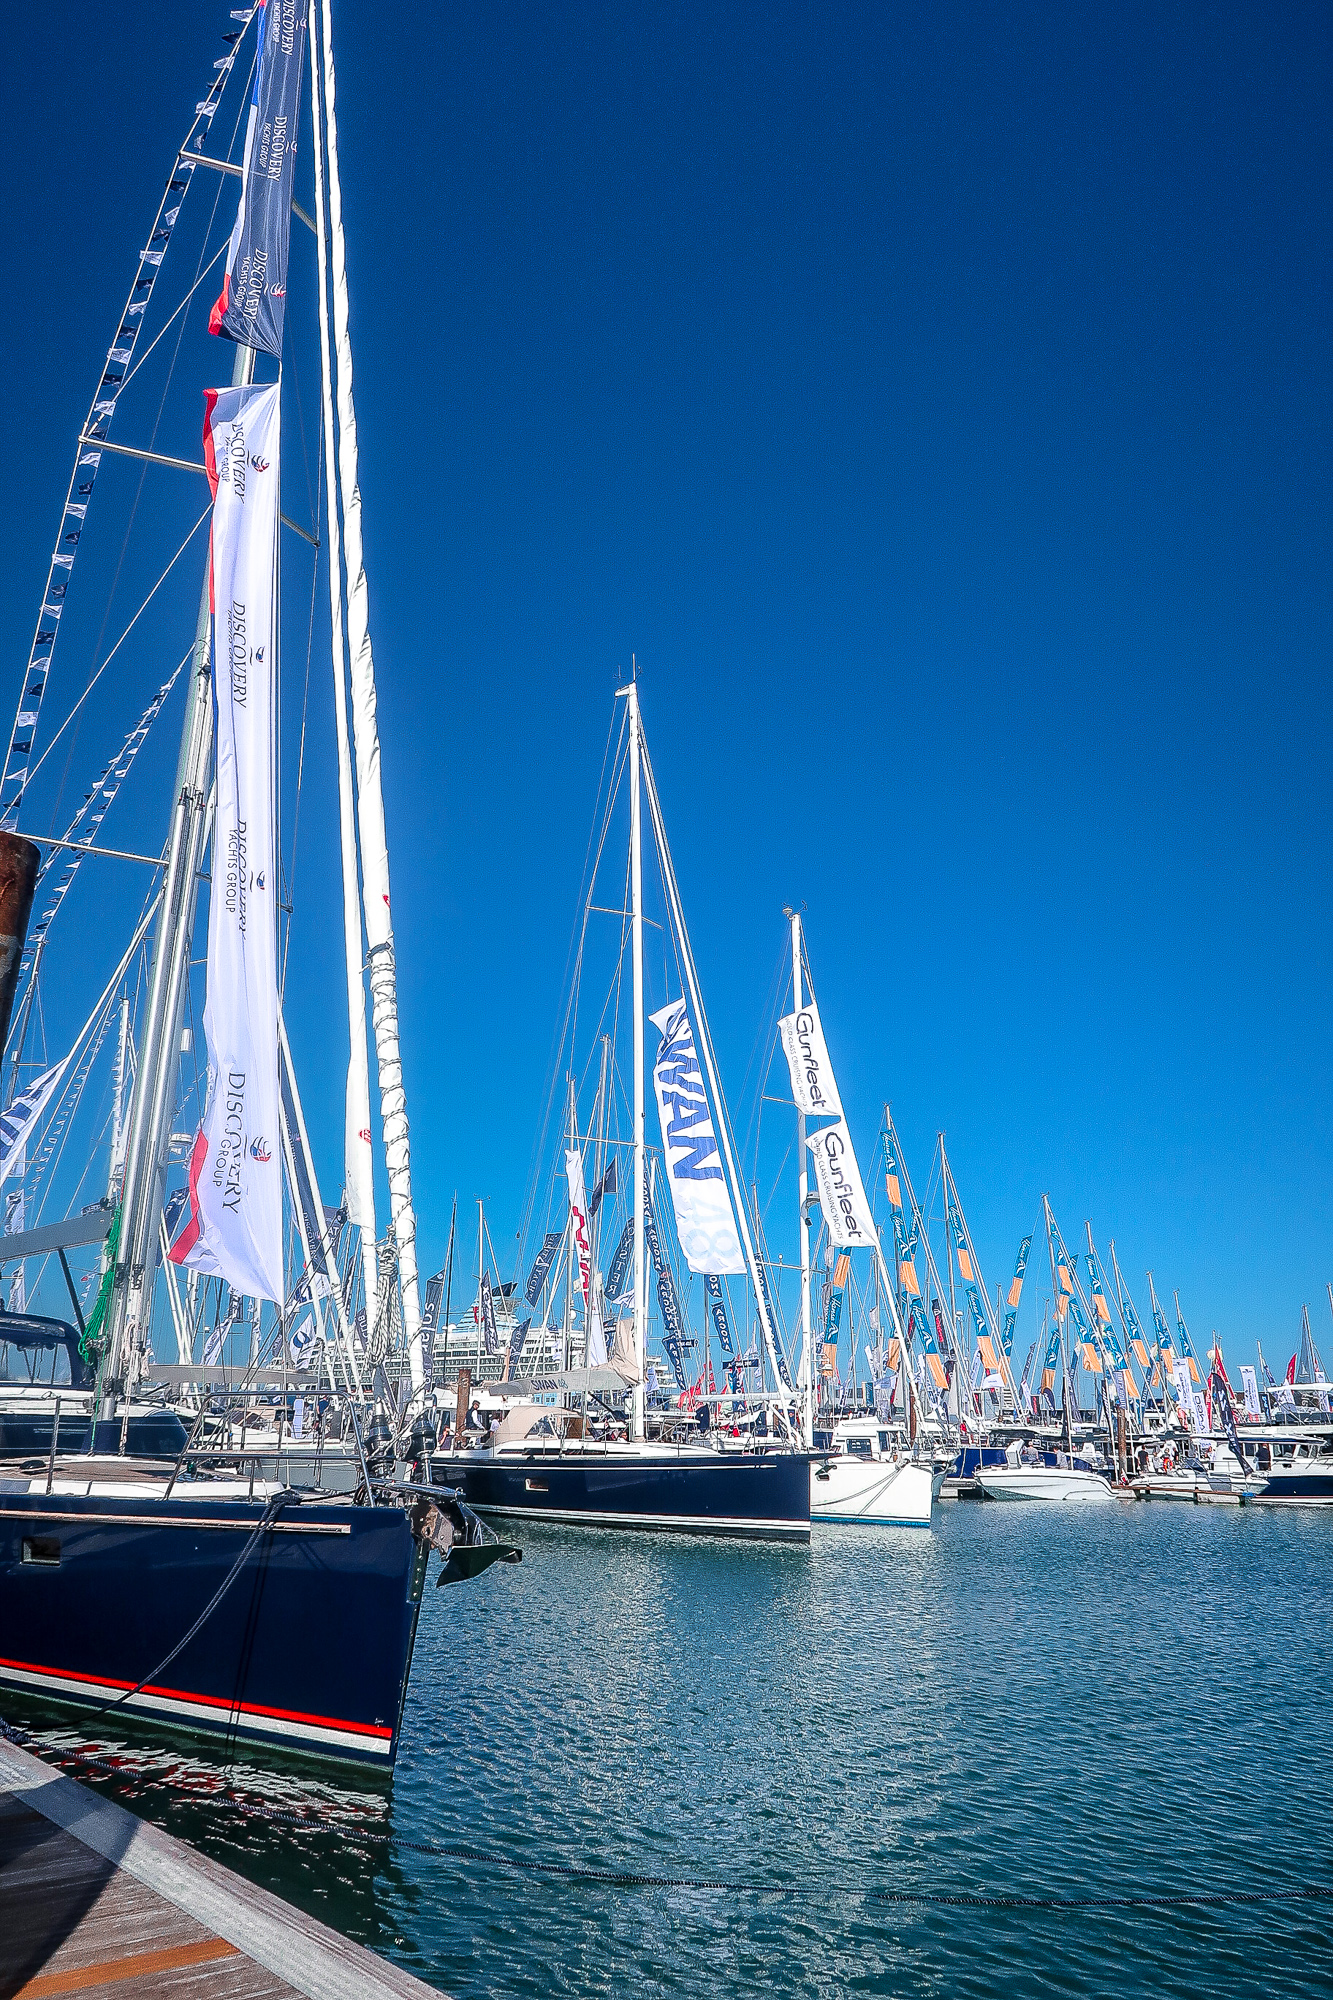 Southampton Boat Show: How To Get Discounted Tickets 2